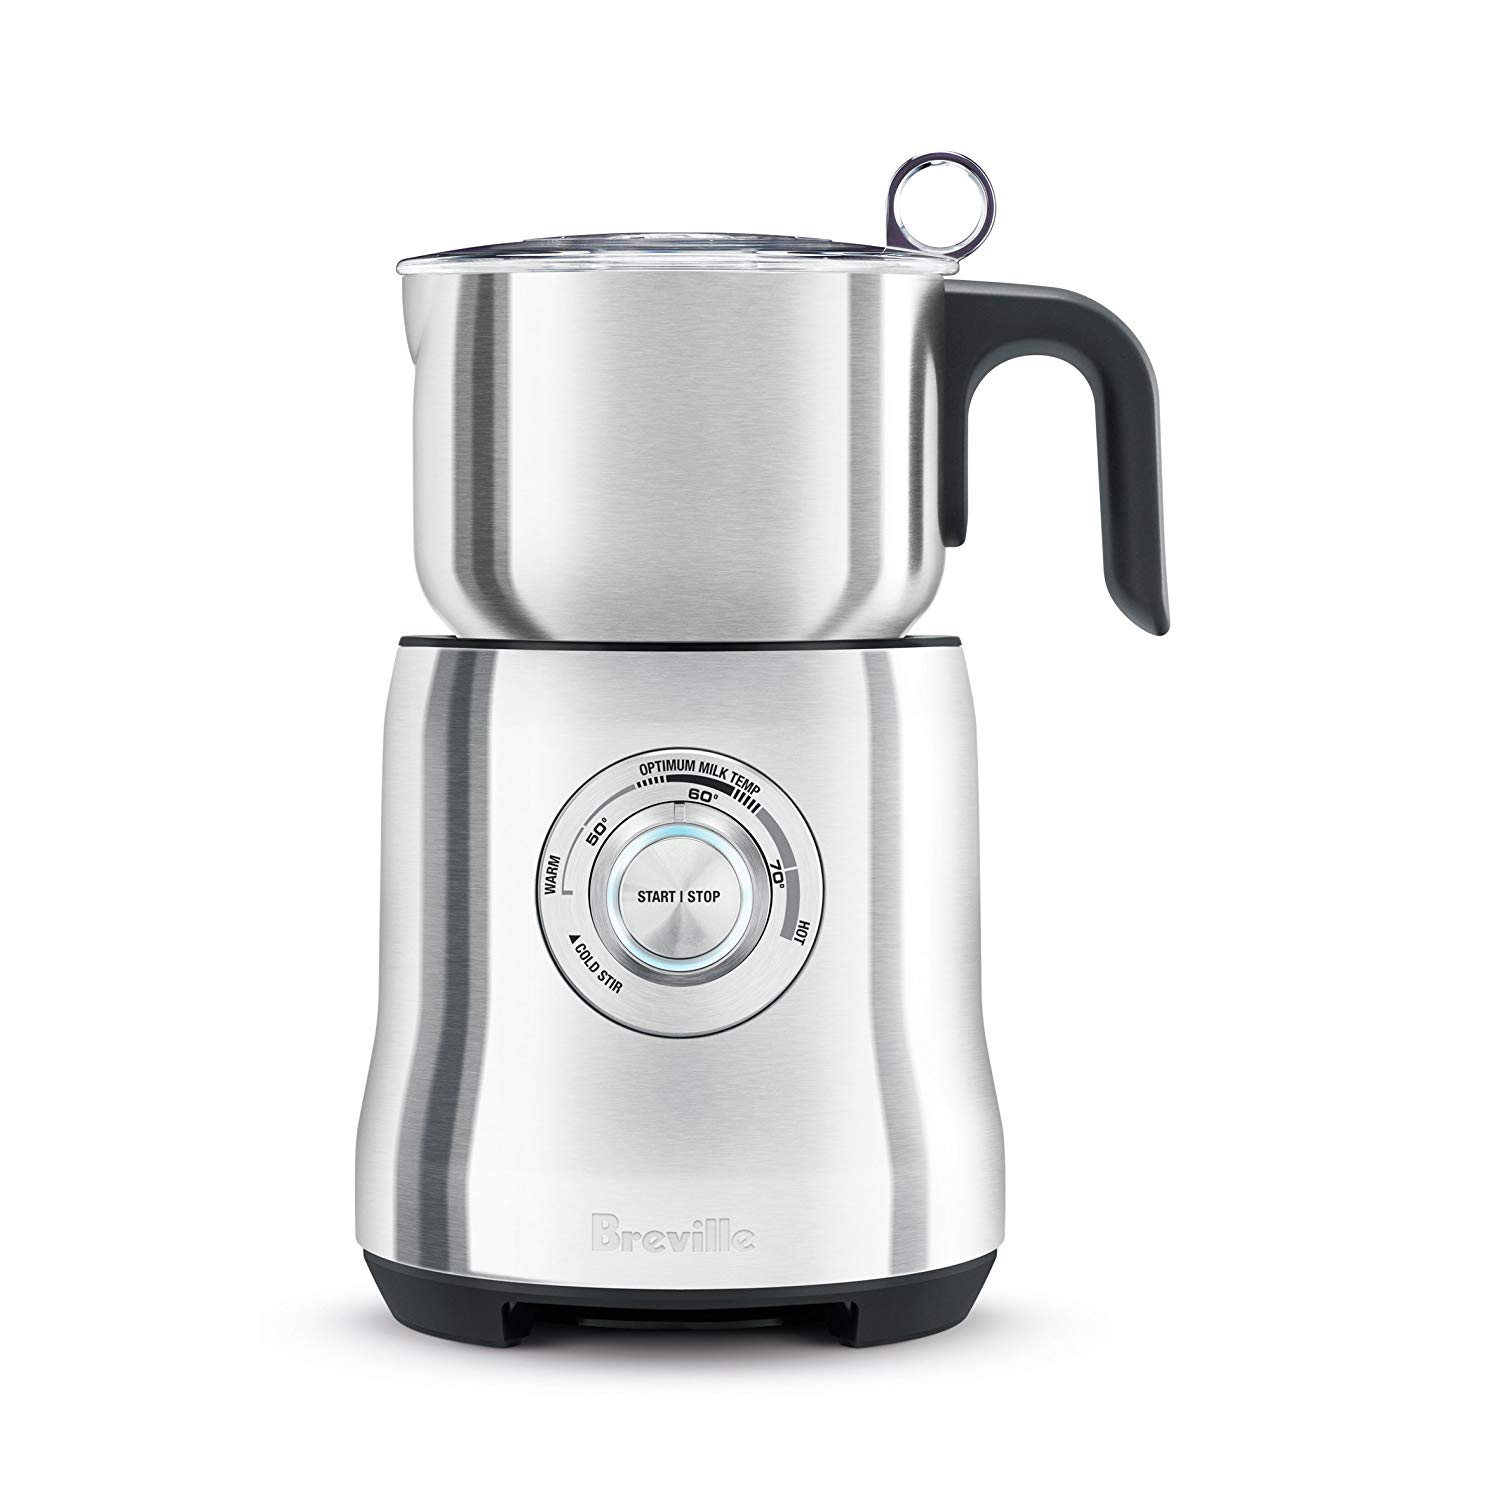 Breville Milk Cafe Stainless Steel Milk Frother